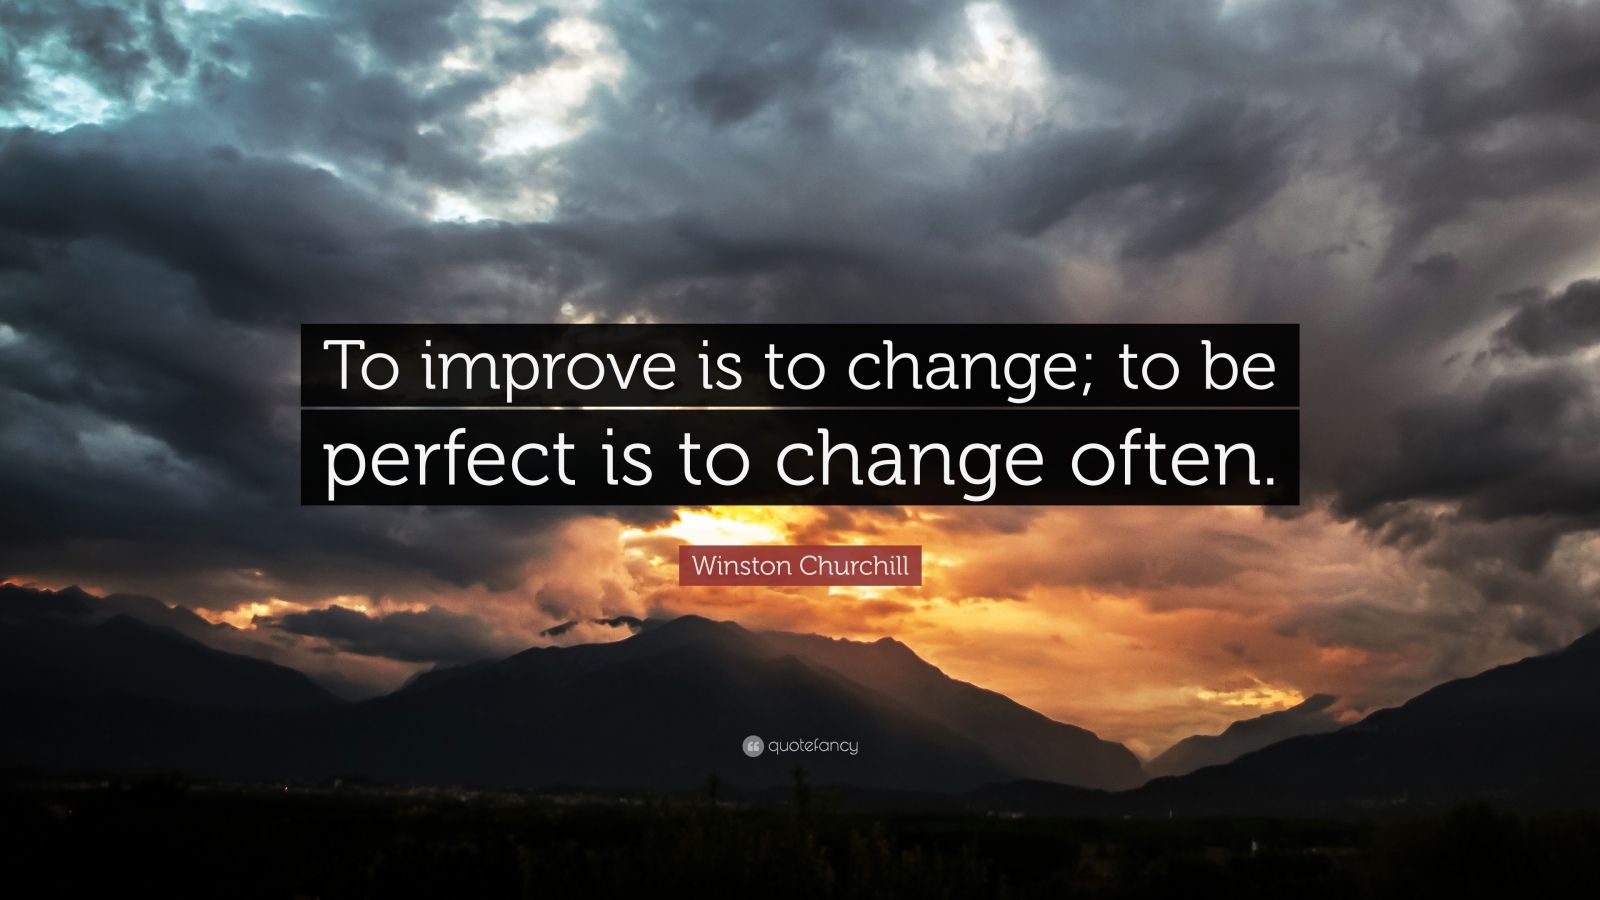 Winston Churchill Quote “To improve is to change; to be